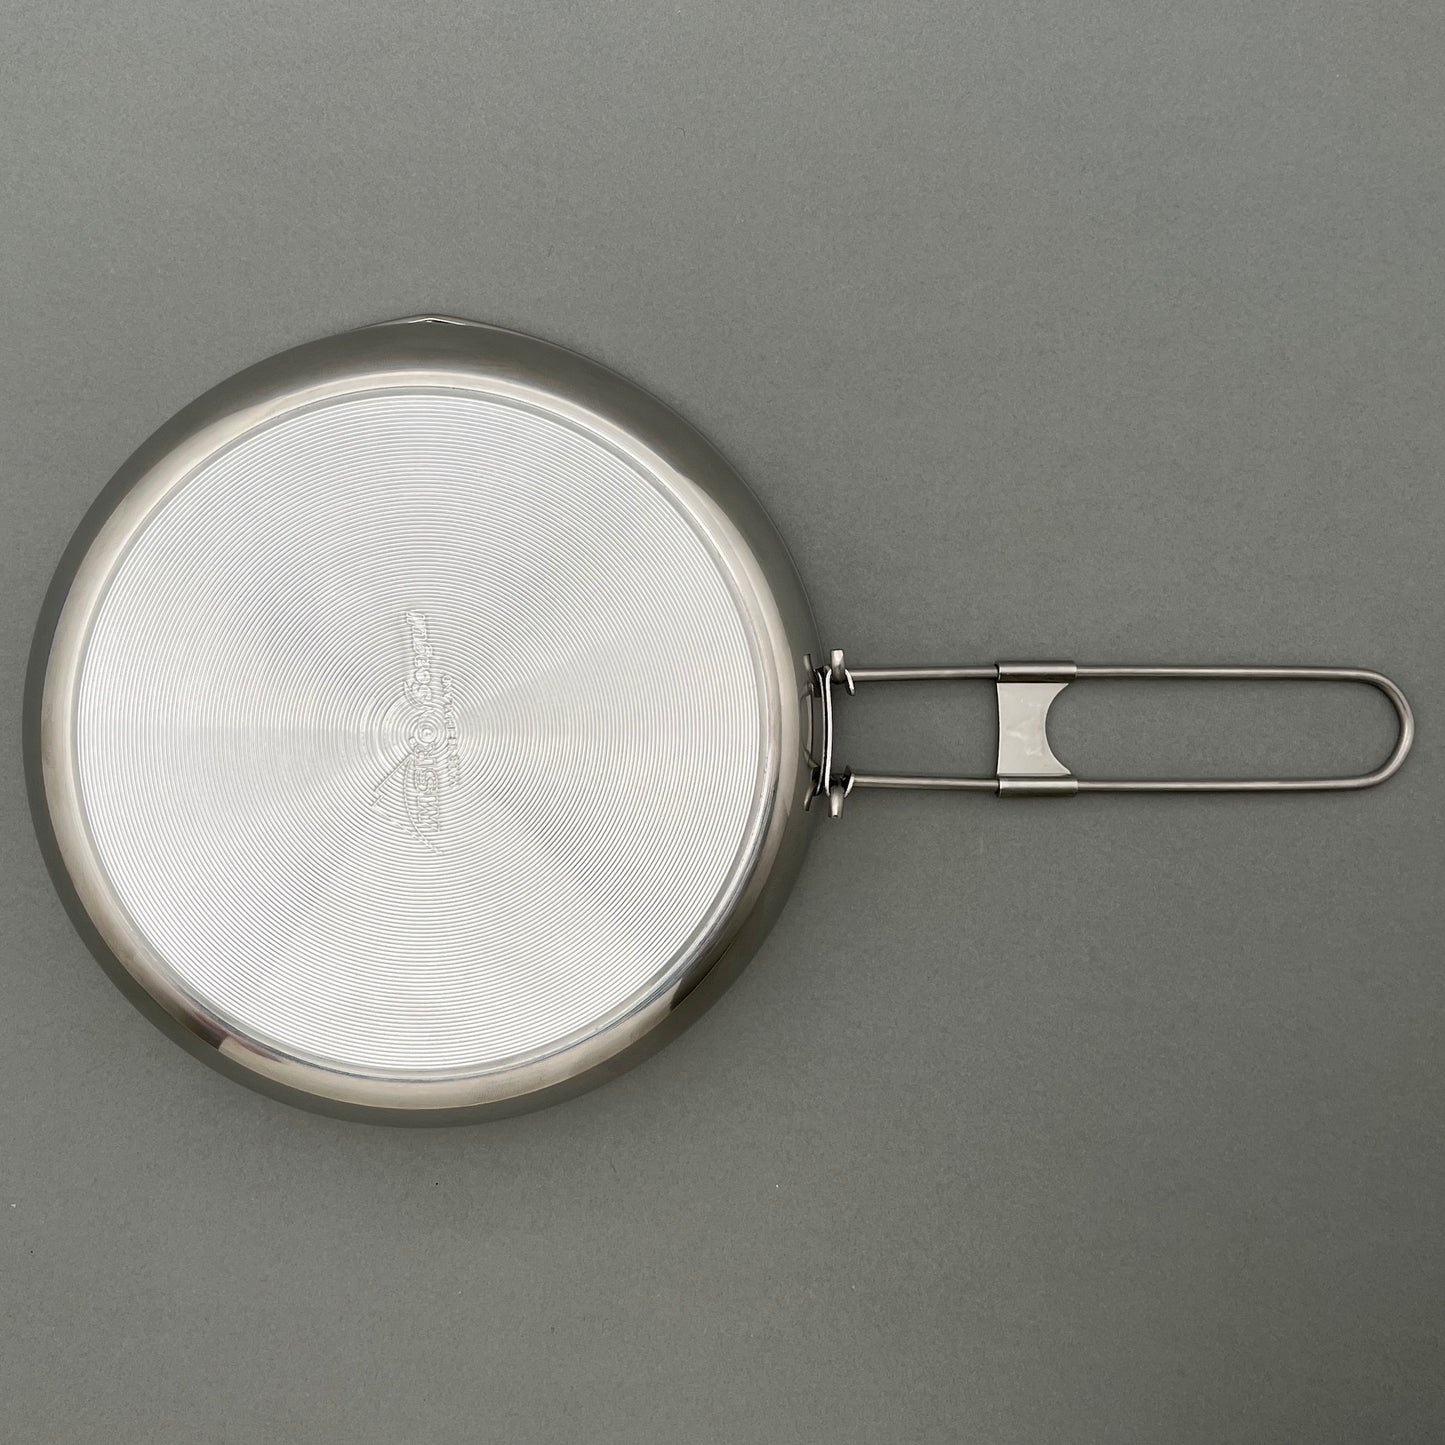 The backside of a stainless steel fry pan on a gray background